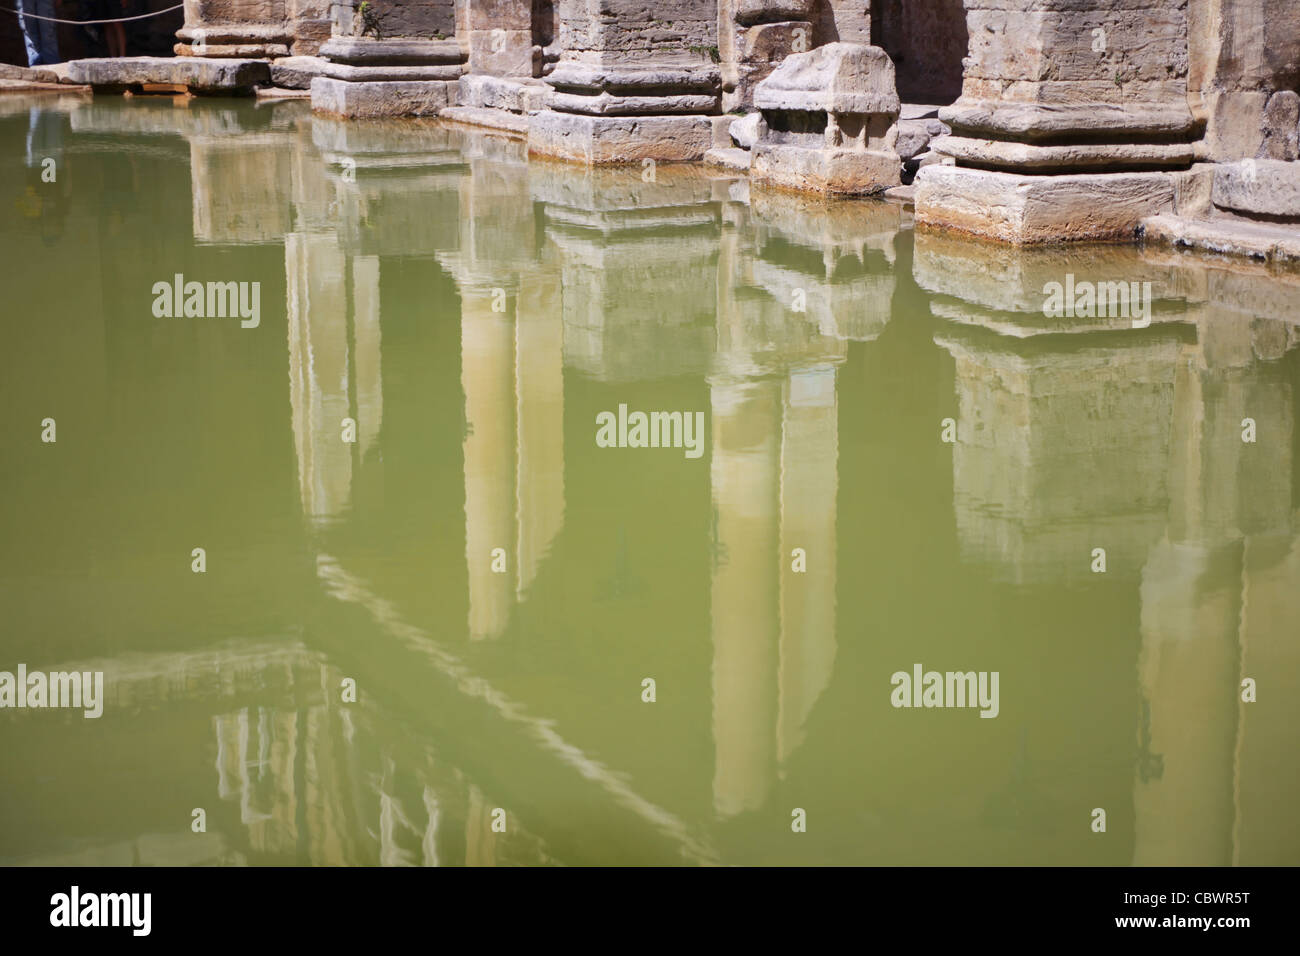 Reflections of the pillars and columns at the Roman Baths in Bath Stock Photo